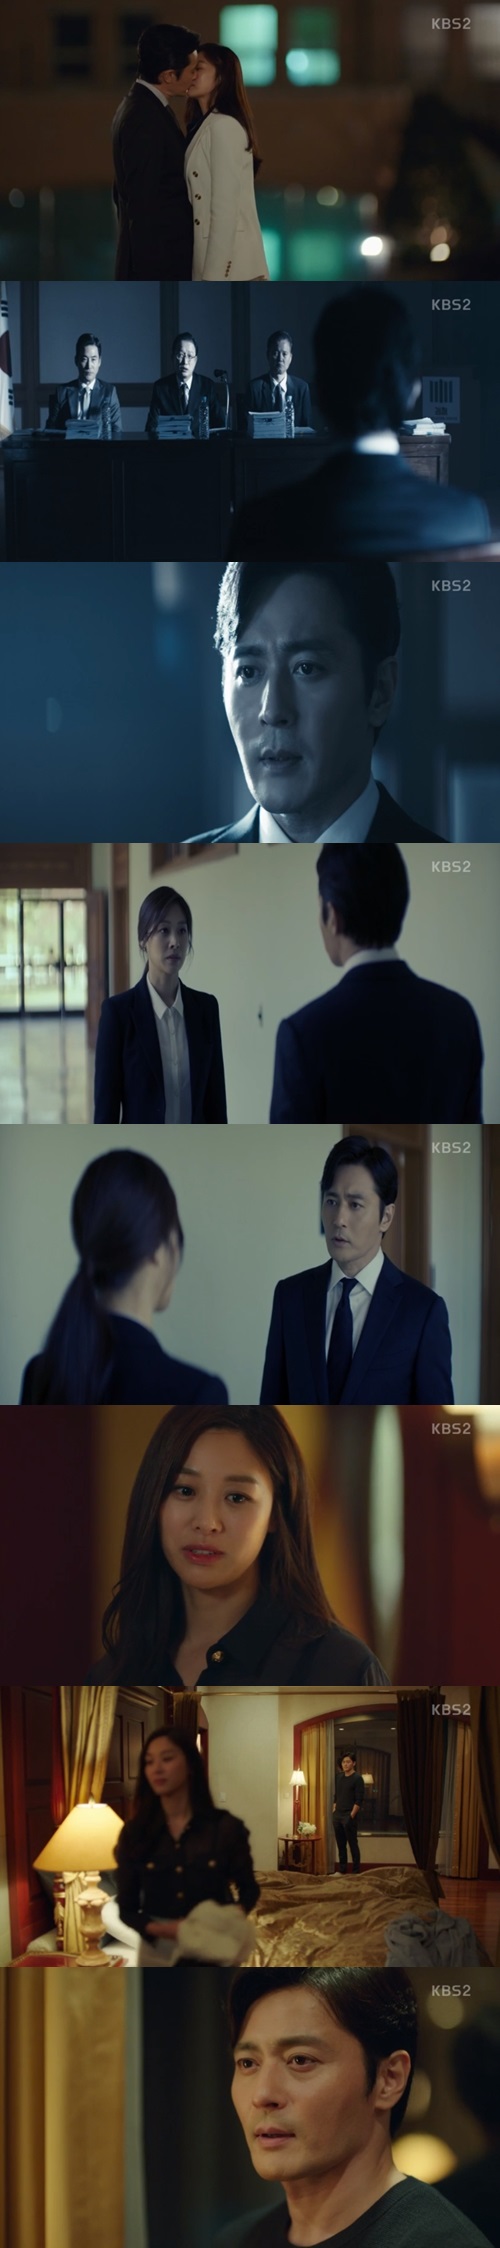 The old lover Jang Dong-gun Jang Shin-young was completely separated after 13 years of reunion.In the 4th KBS 2TV drama Suits (played by Kim Jung-min/directed by Kim Jin-woo), which was broadcast on May 3, the separation of Miniforce Seok (Jang Dong-gun) and Na Ju-hee (Jang Shin-young) was drawn.Miniforce was previously reunited with his former lover Na Ju-hee as an attorney for the other side, taking charge of the divorce case between the airline president and Nam Sang-moo.Miniforce has set a day unlike usual in the reunion with Naju Hee, while Naju Hee is relaxed.Along with him, the two peoples past inspections were drawn and added to the reason for the separation.On the same day, Miniforce Seok led the divorce issue of Nam Sang-moo, the president of the company, with the help of Park Hyung-sik.Miniforce gave Go Yeon-woo an instruction to reconstruct the romance of the two, and Go Yeon-woo made the love of the chaebol and the ordinary man into a tragic love story by comparing the love of God and man.Miniforce said, What if I write a real play? And then I noticed that the president and Nam Sang-moo really chose to divorce for each other.Miniforce pinpointed the fact, and the president and Nam Sang-moo reached an agreement without going to trial, and the case was concluded and Miniforce and Najuhee met and drank.The reason for their separation from each other was revealed along with him, and the former prosecutor Na Ju-hee used the bait using the victim to catch the criminal, and the fact was discovered and he was in a disciplinary crisis.Miniforce was trying to take responsibility, but he chose Miniforce from the top and said, I have a great expectation for you.Thats the way to save both you and me. We dont seem to fit in, Na Ju-hee said. Lets not face each other again.In the court or outside, and Miniforce was also parted, Yes, it is not good to meet. It was my fault, and he was just keeping the principle, but whatever the reason and the process, it was the moment when my love ended, Na Ju-hee recalled.But Najuhee, who met again in 13 years, said, It was a lie that I would not see you again. I do not know what you were like.At least I was glad to be able to fight and love you enthusiastically for a long time.Now there is nothing we can do but look at each other from the other side. He approached Miniforce and kissed.